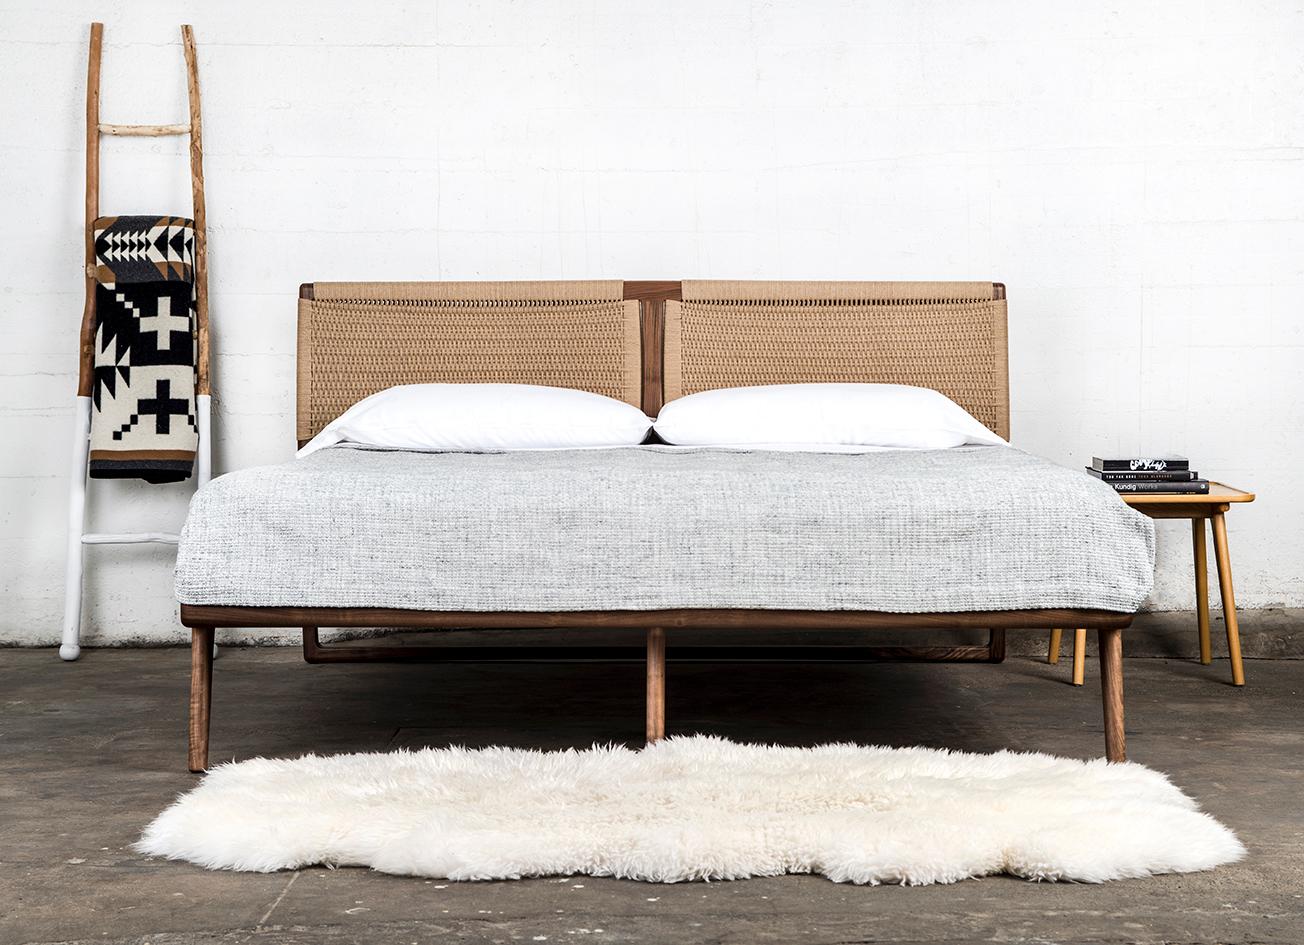 This listing is for a Rian Bed in Walnut with Kraft Danish Cord, King. Custom options available. 

A good bed is hard to find, but a Semigood bed is hard to beat. The Rian Bed features a unique two panel woven Danish cord headboard making for one of